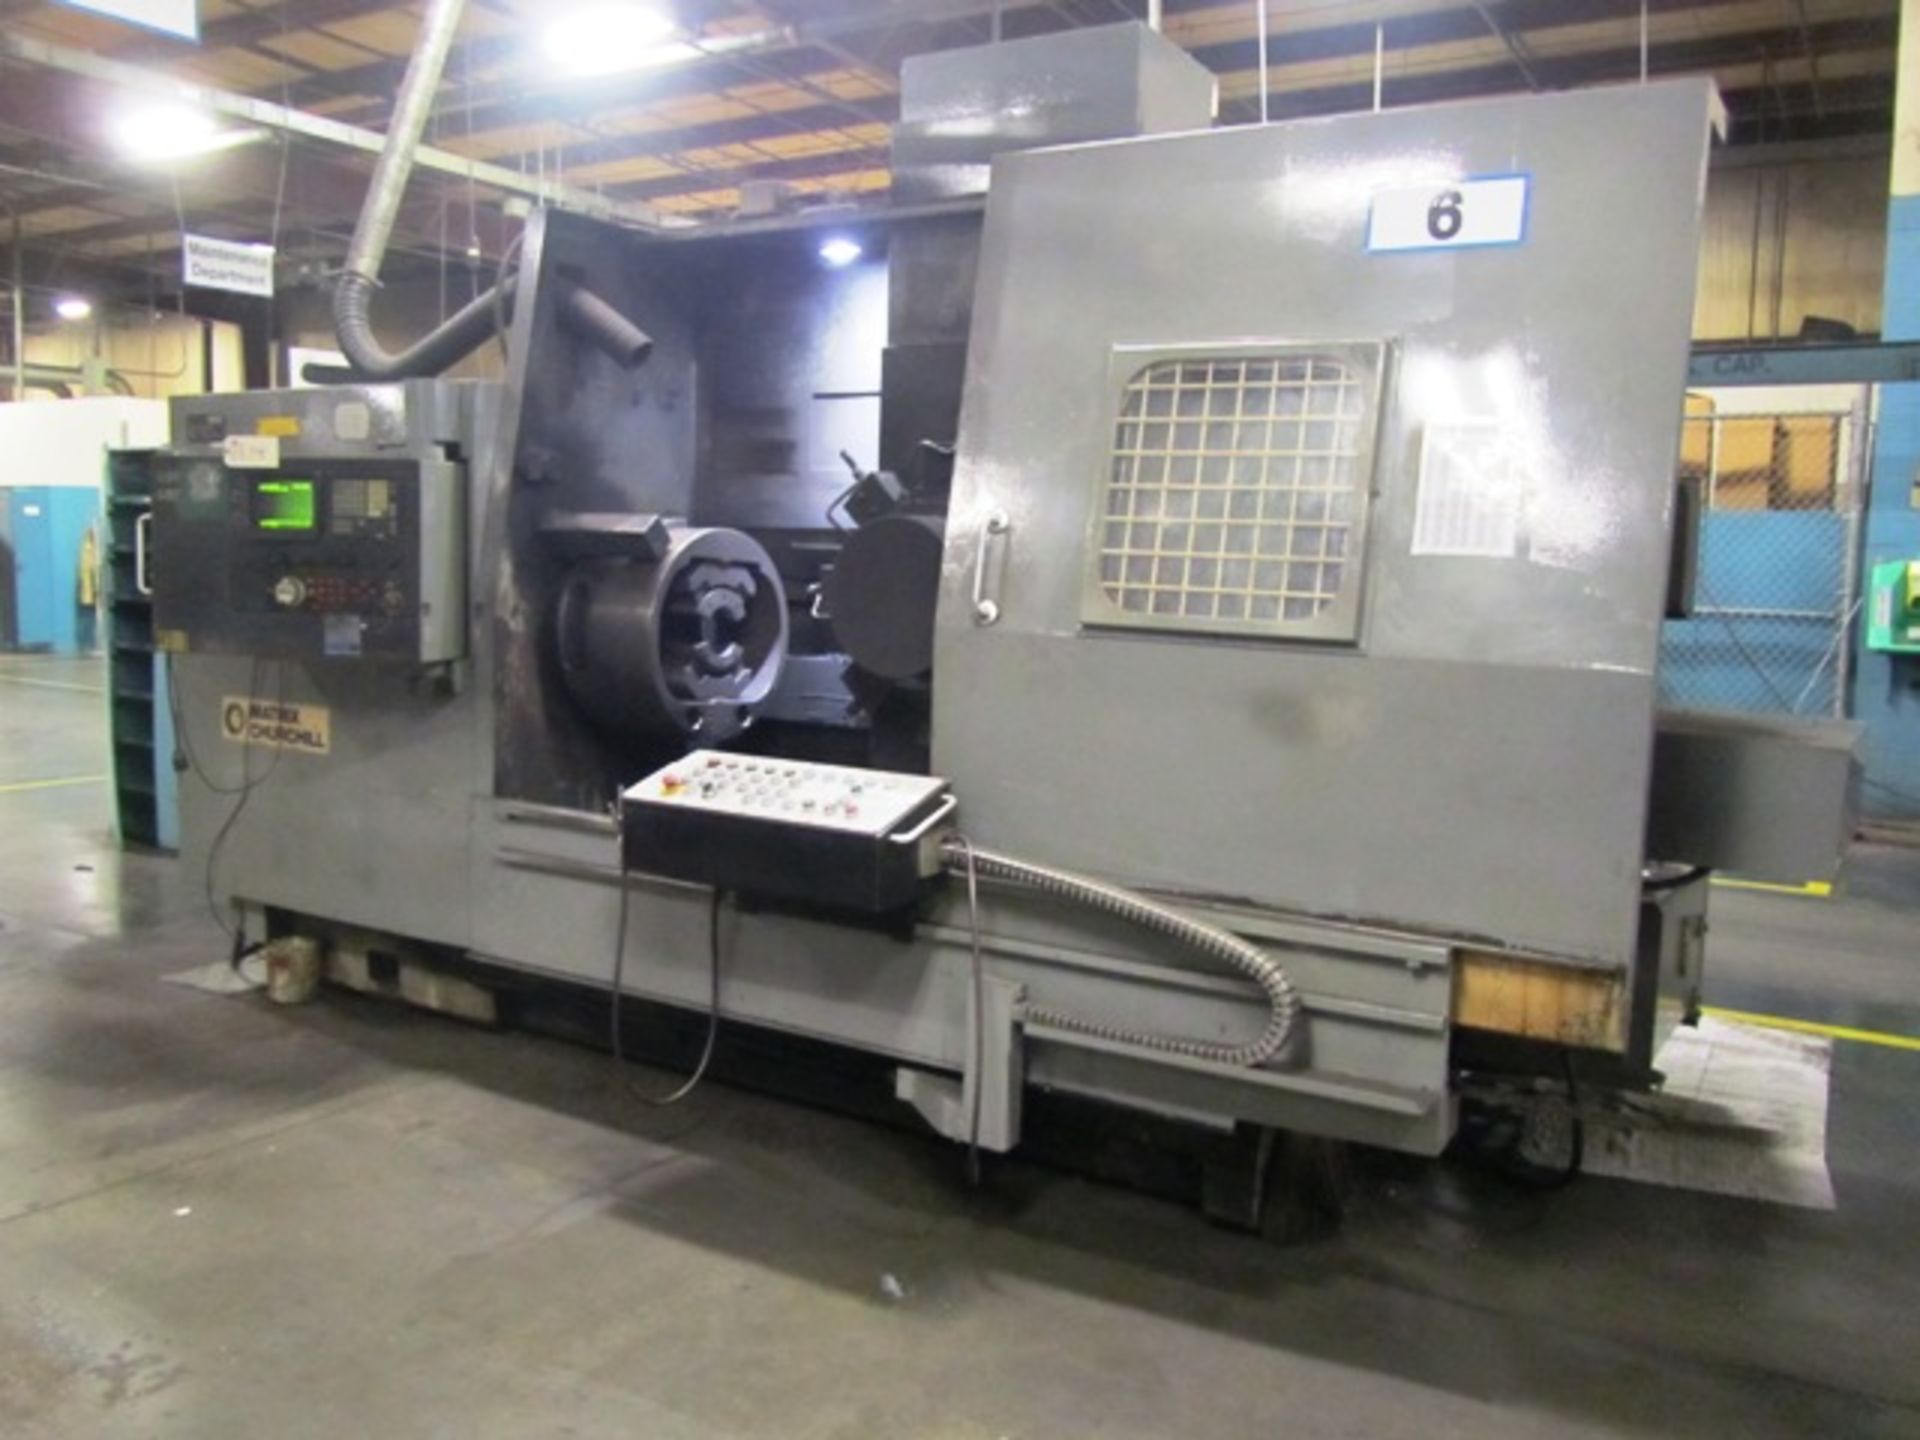 Matrix Churchill Type 7/45 CNC Chucker with 8 Position Turret, Forkardt 24'' Indexing Chuck, Fanuc